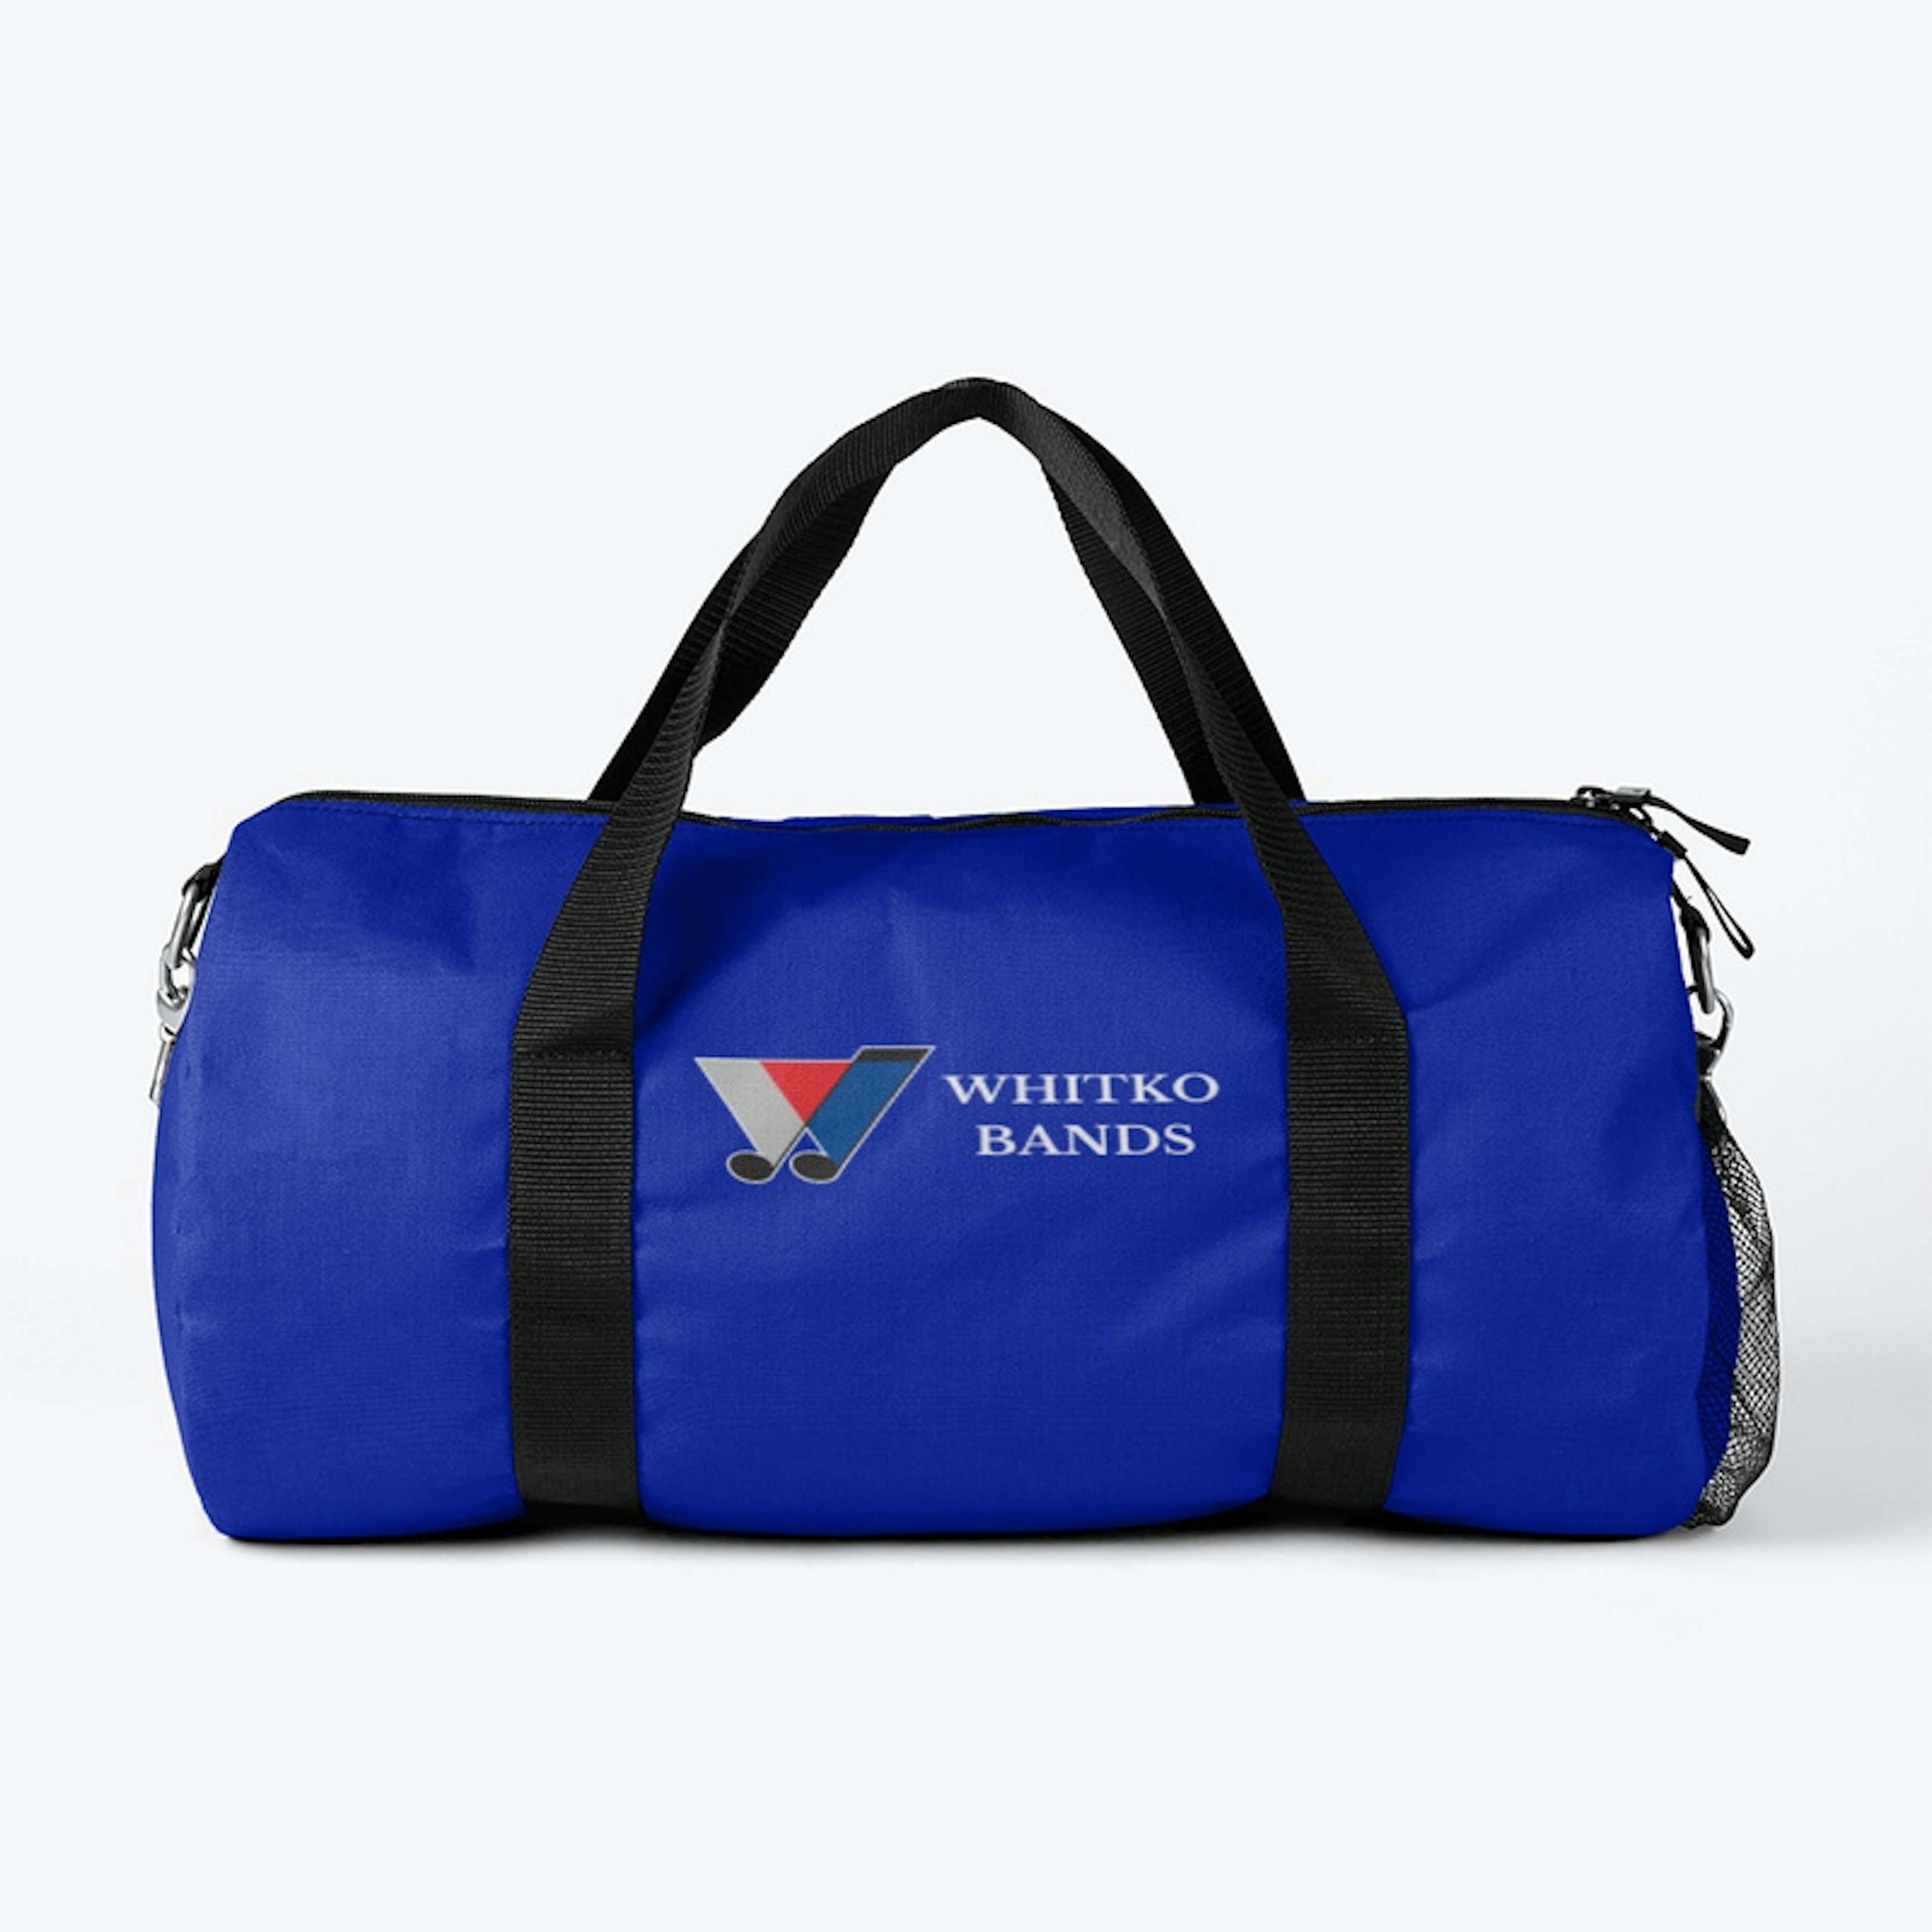 Whitko Bands Duffle Bag